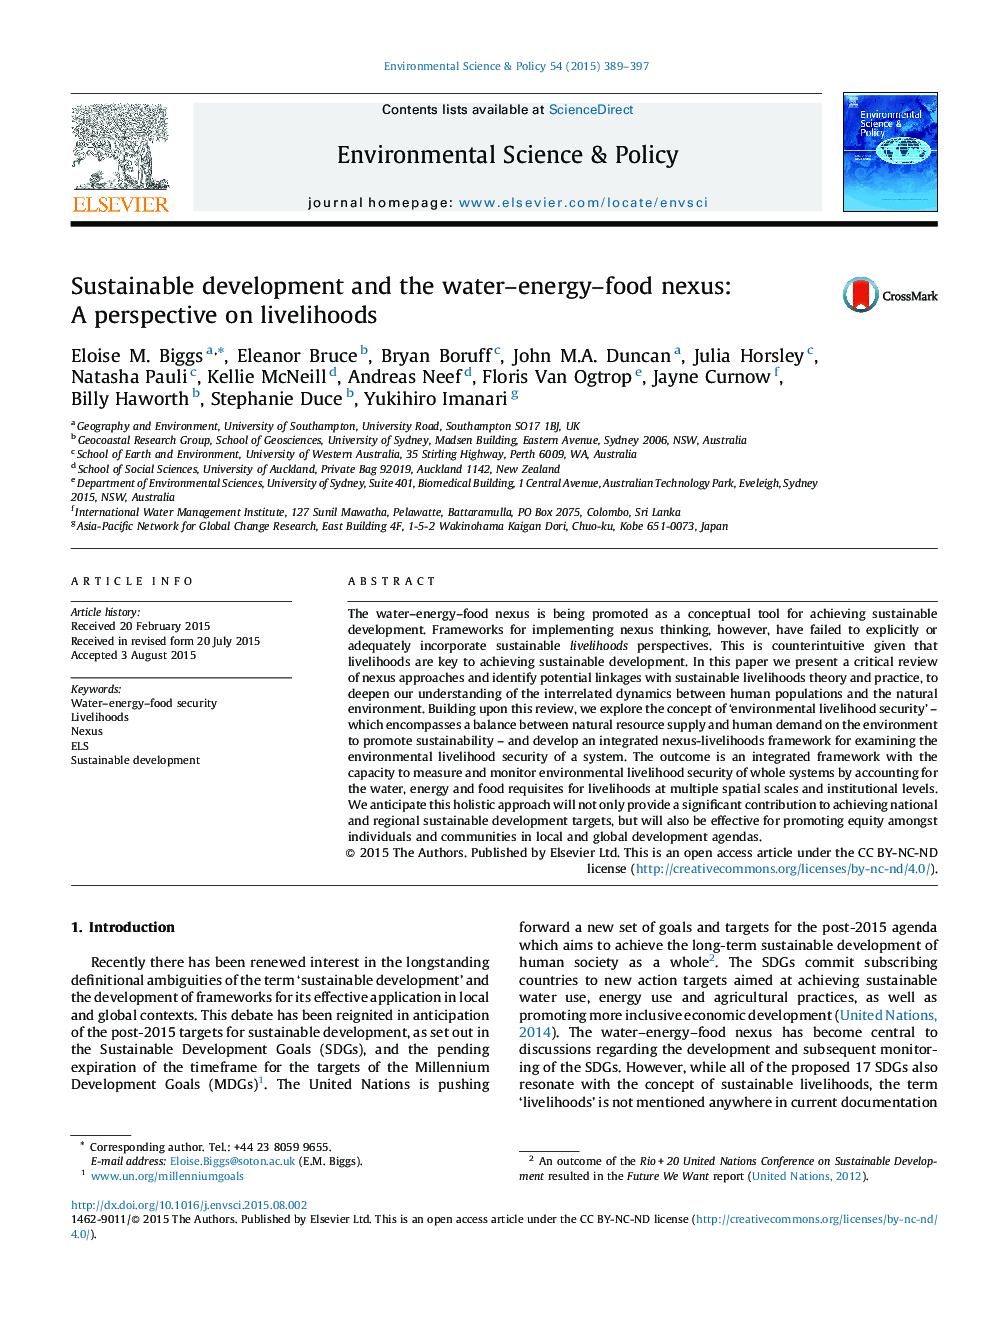 Sustainable development and the water-energy-food nexus: A perspective on livelihoods